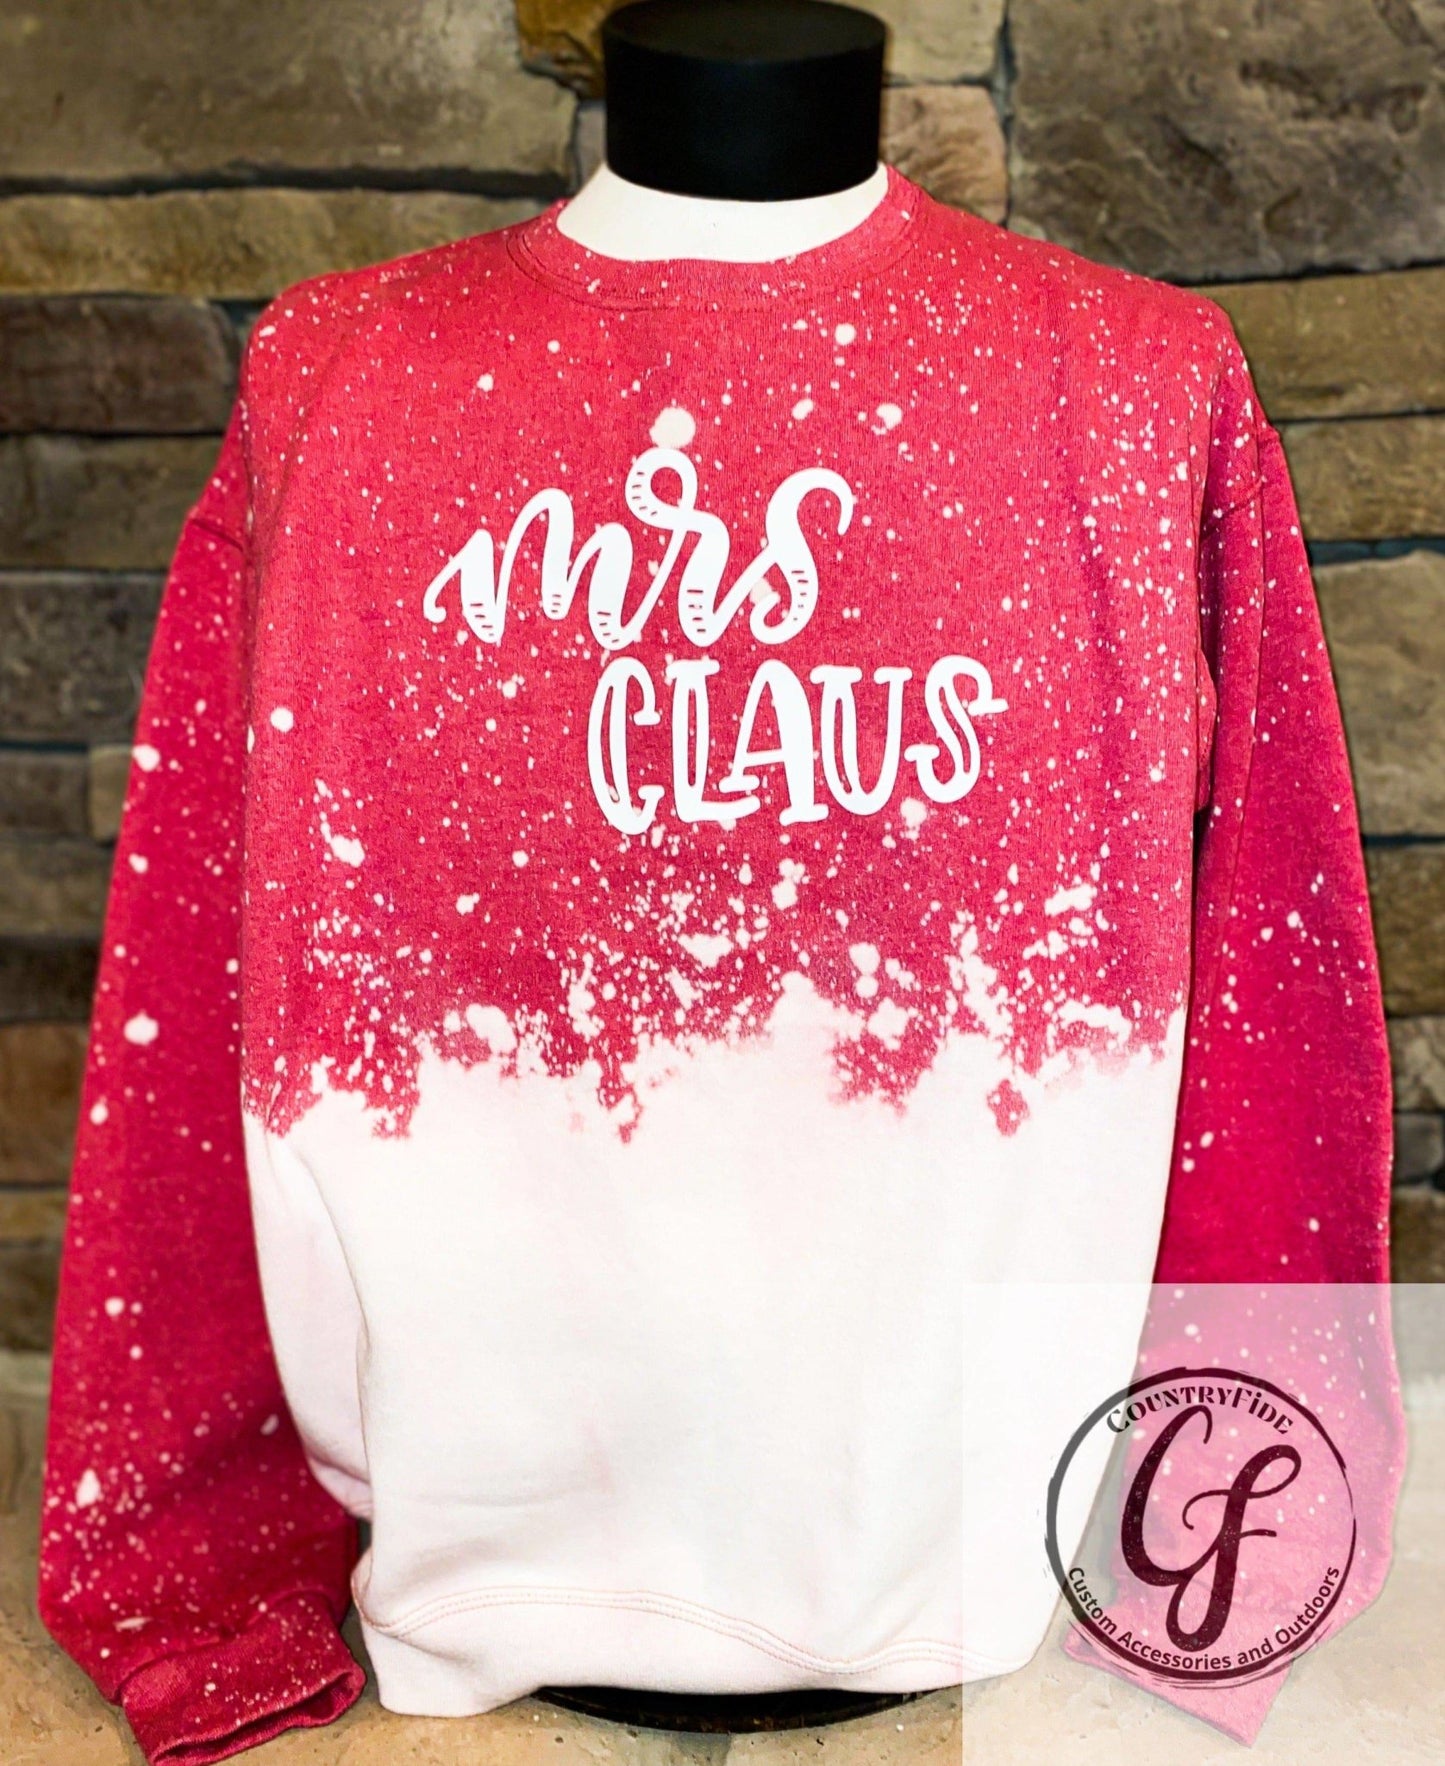 Lady Claus - CountryFide Custom Accessories and Outdoors